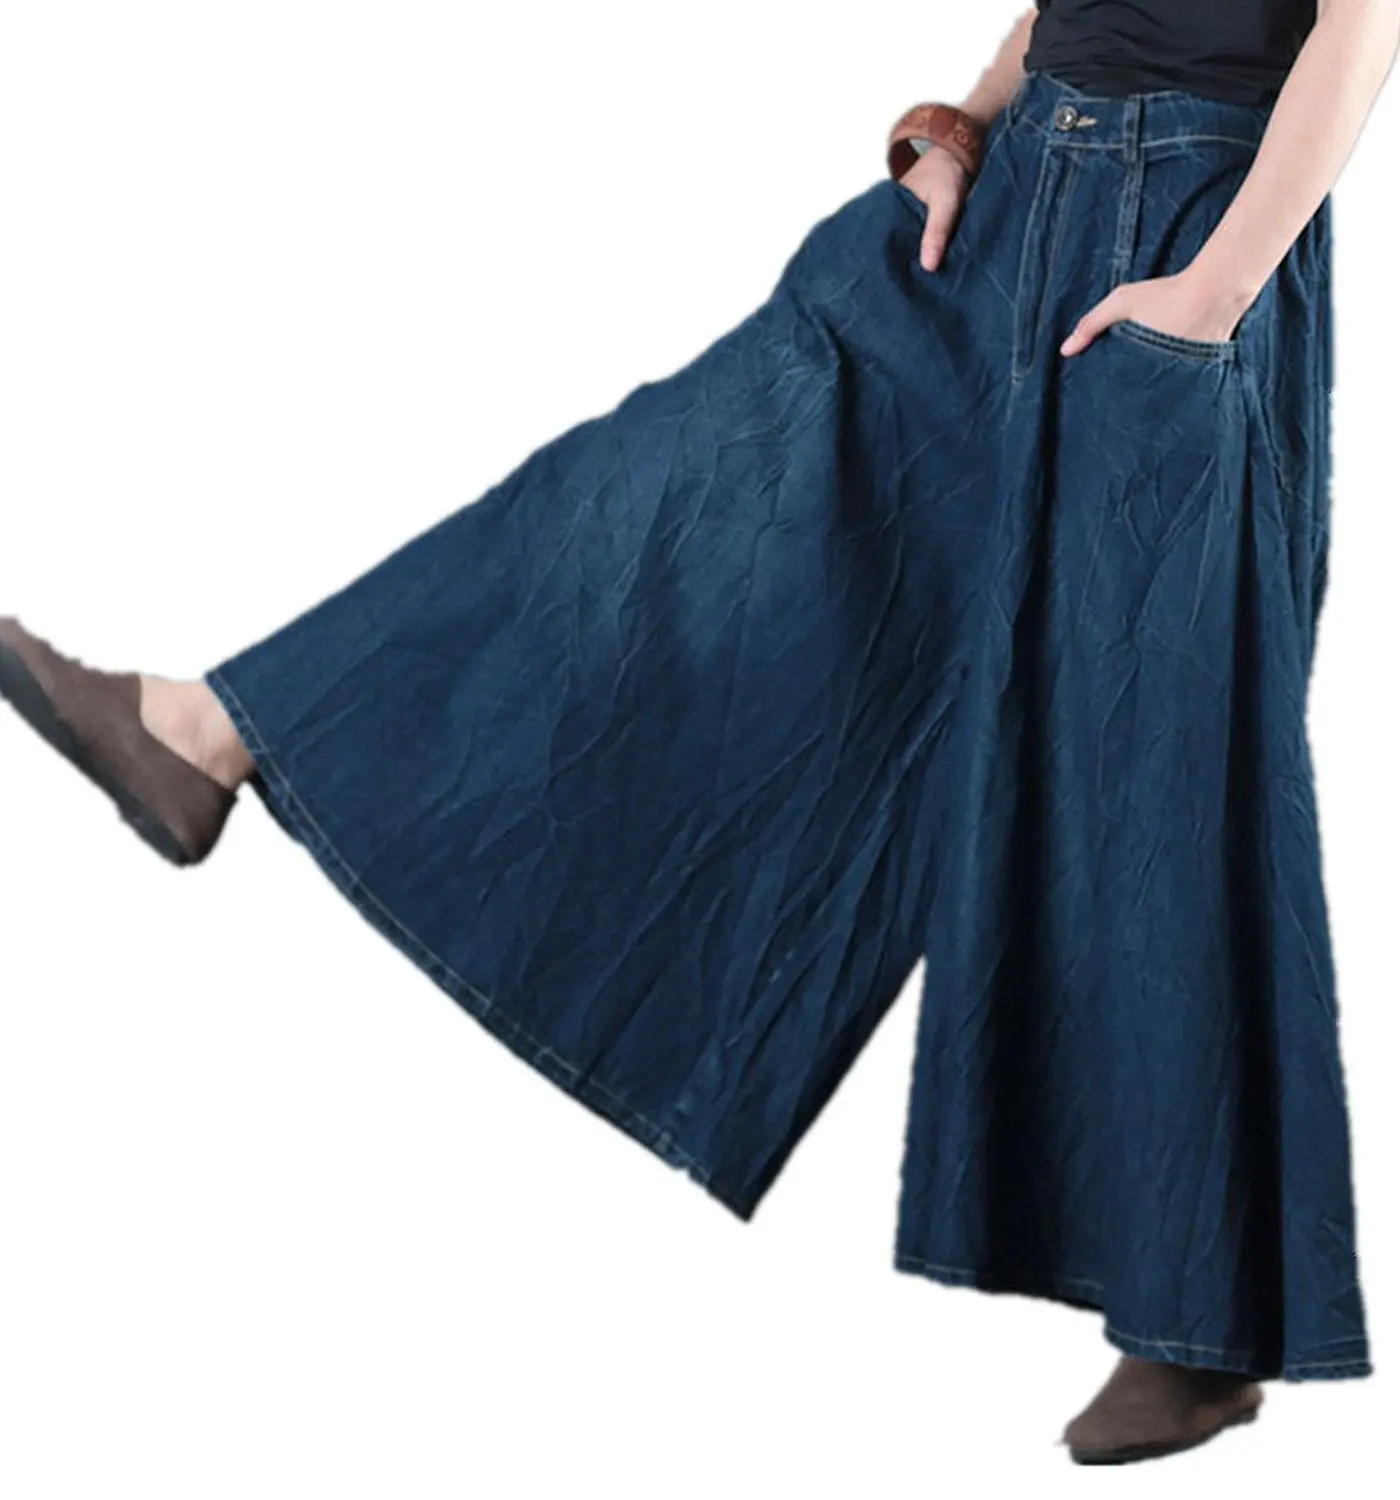 Cheap Low Crotch Jeans, find Low Crotch Jeans deals on line at Alibaba.com